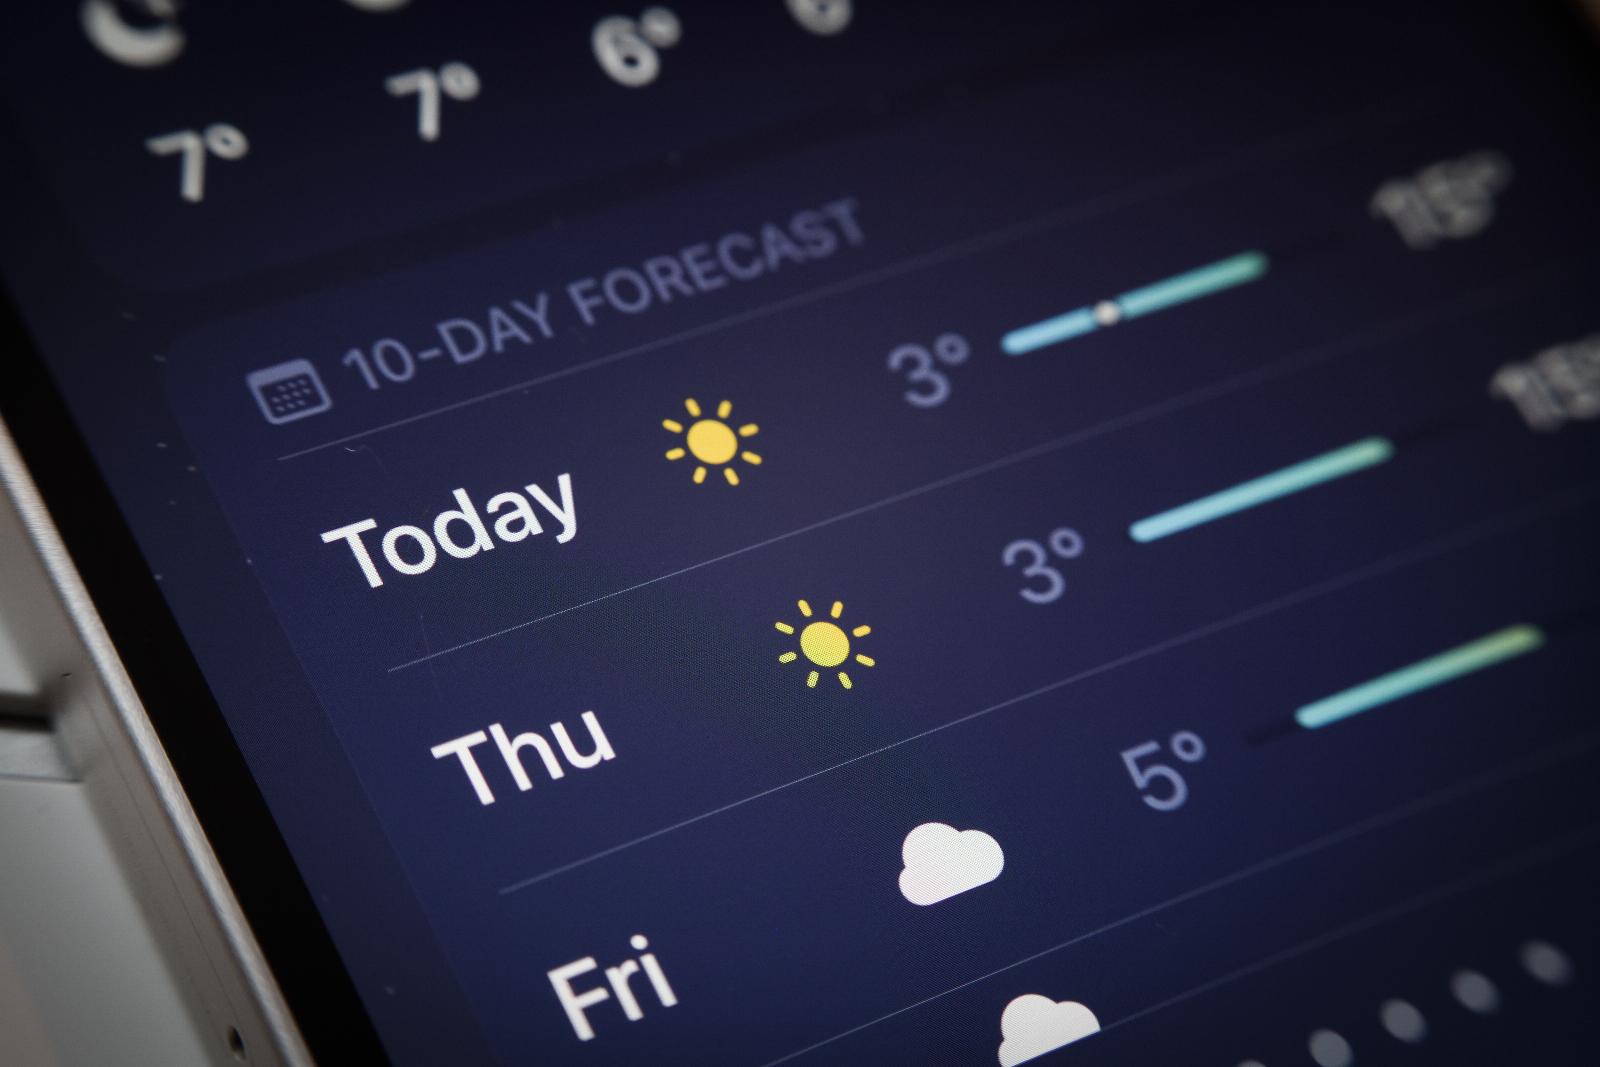 Apple restores its Weather app following widespread issues